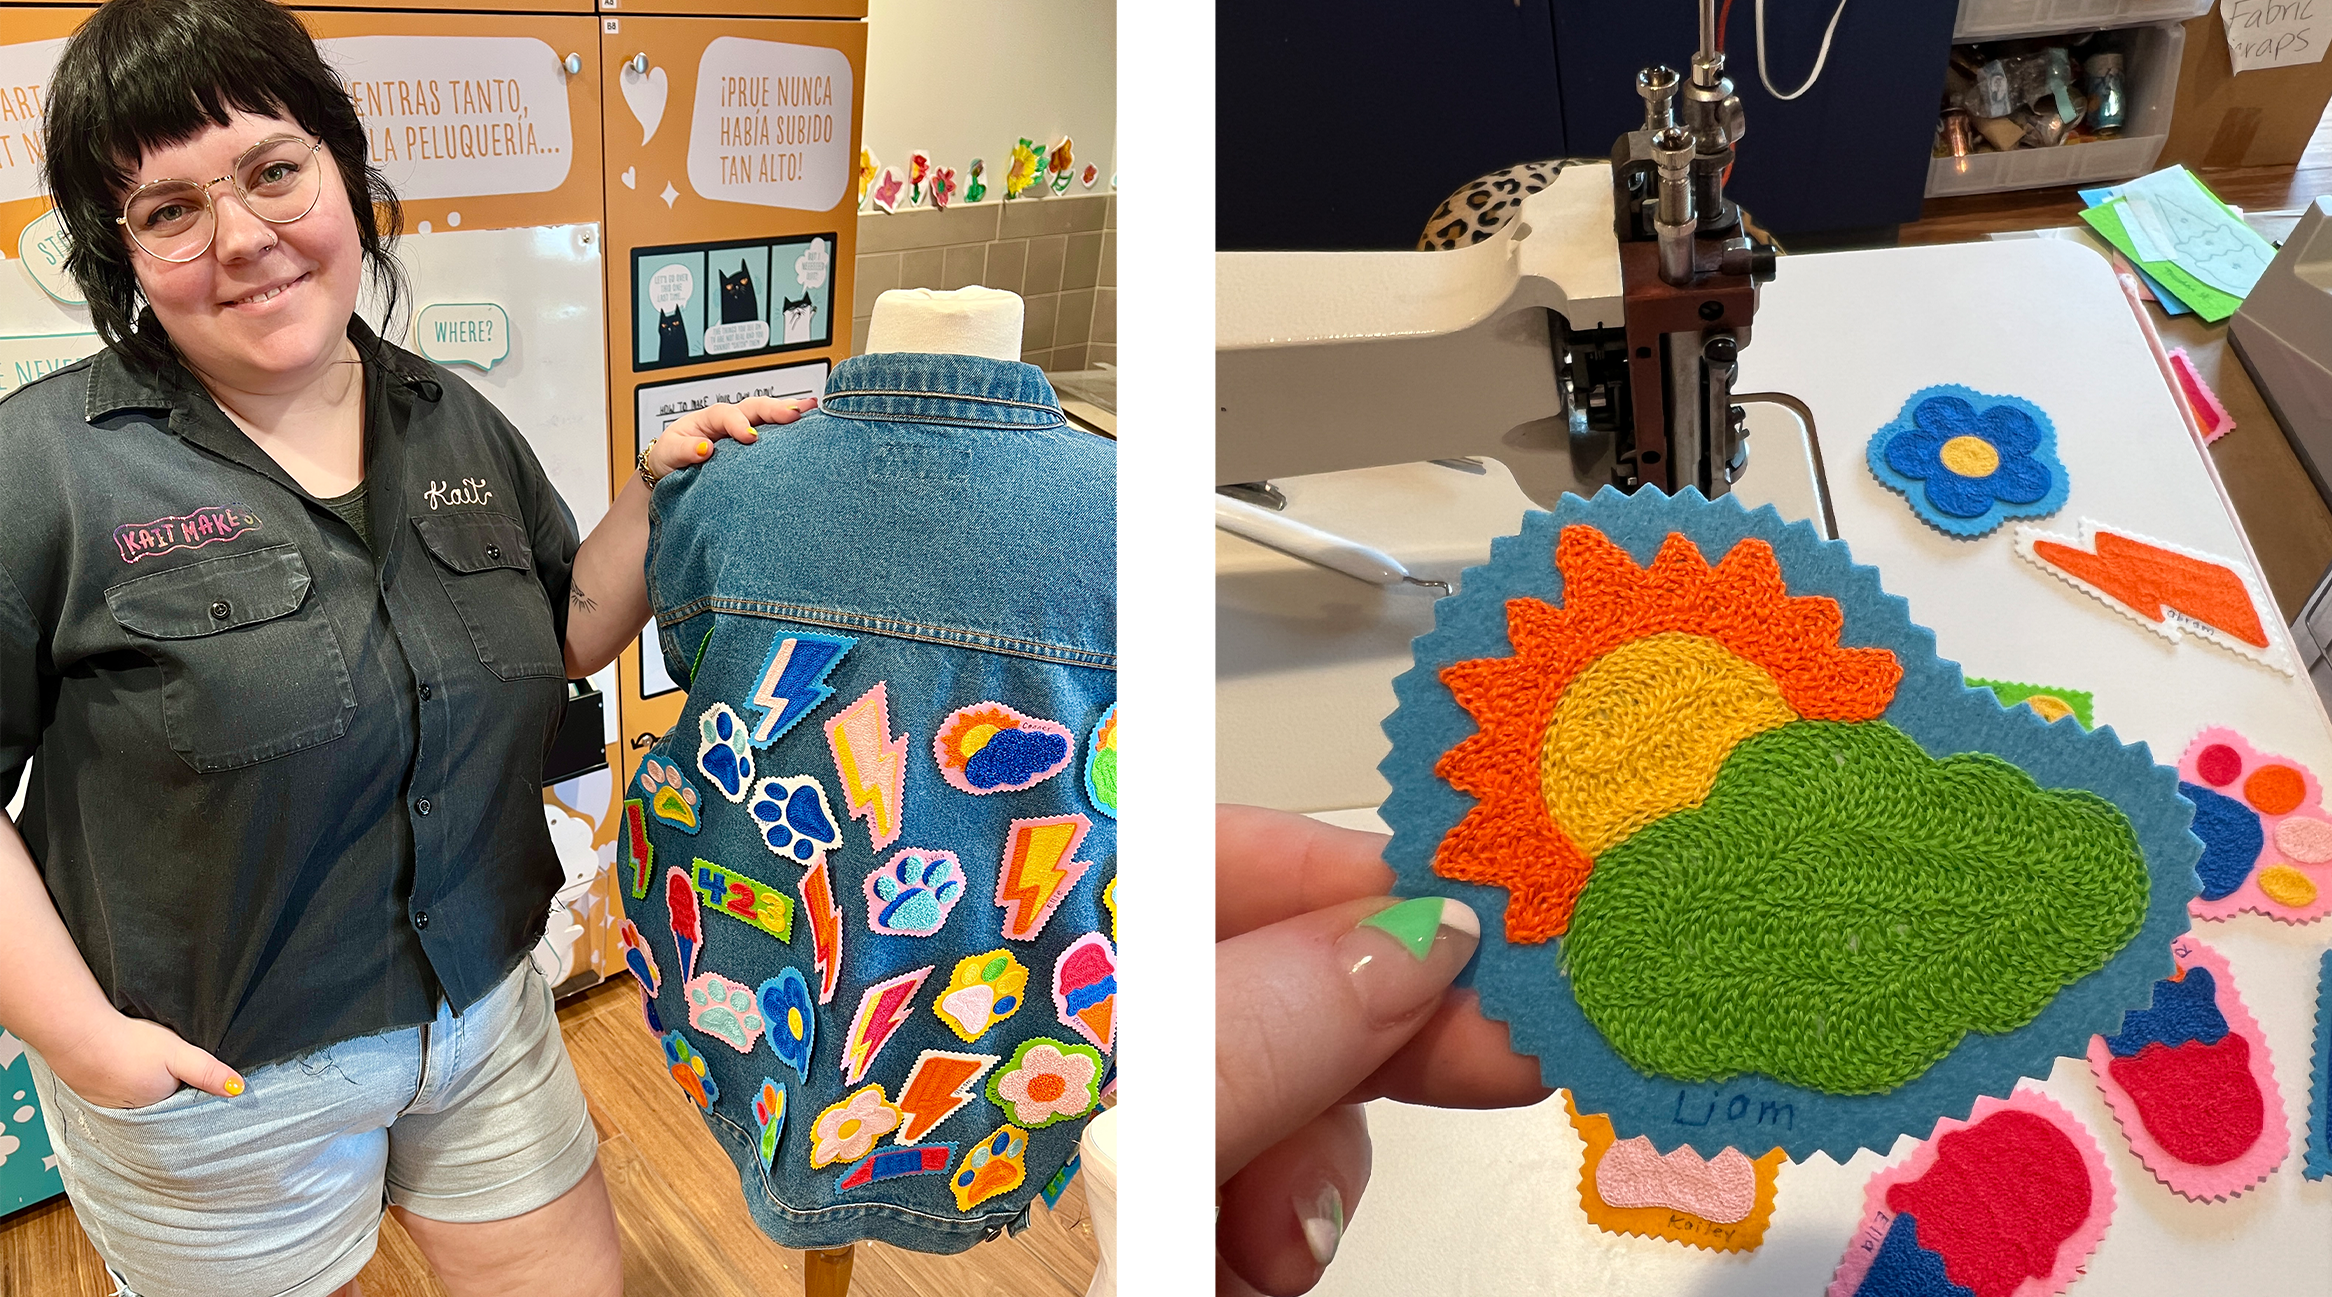 Kaitlyn Willow standing next to the Creative Discovery Museum Community chainstitch jacket with colorful patch designs covering the back with a close up photo of a sun behind a cloud patch in green orange and yellow thread